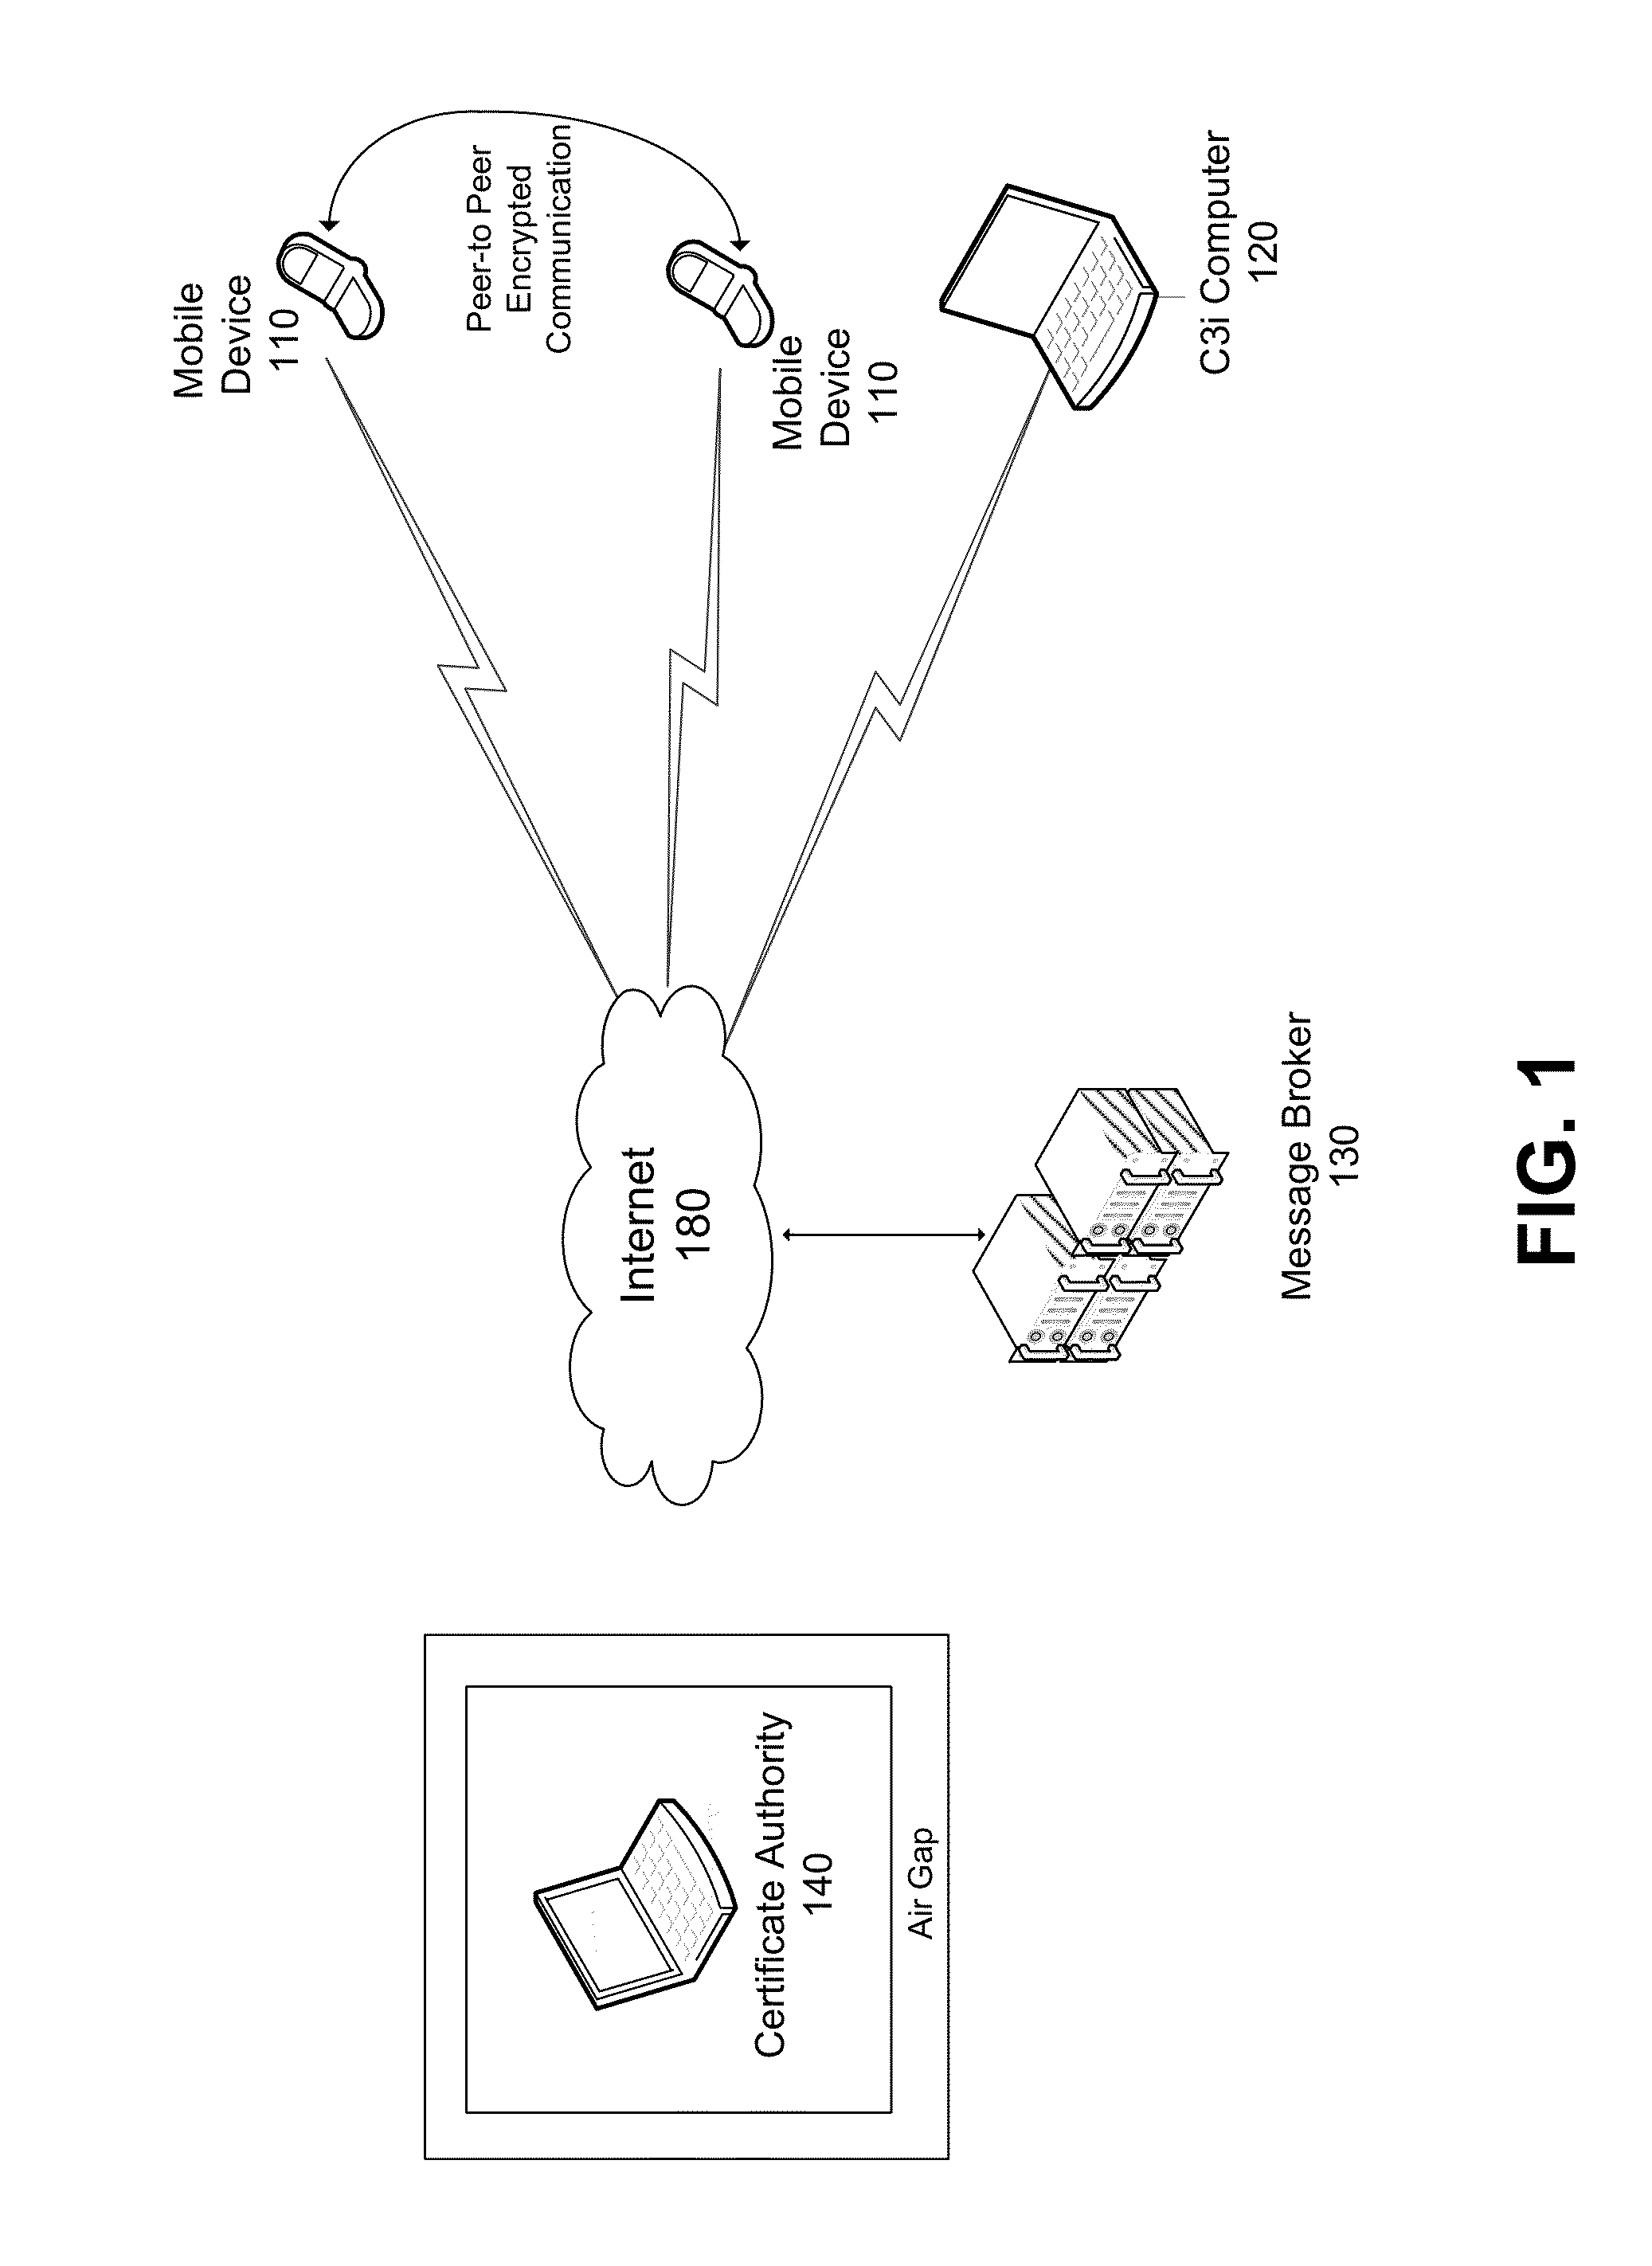 Secure communication system for mobile devices